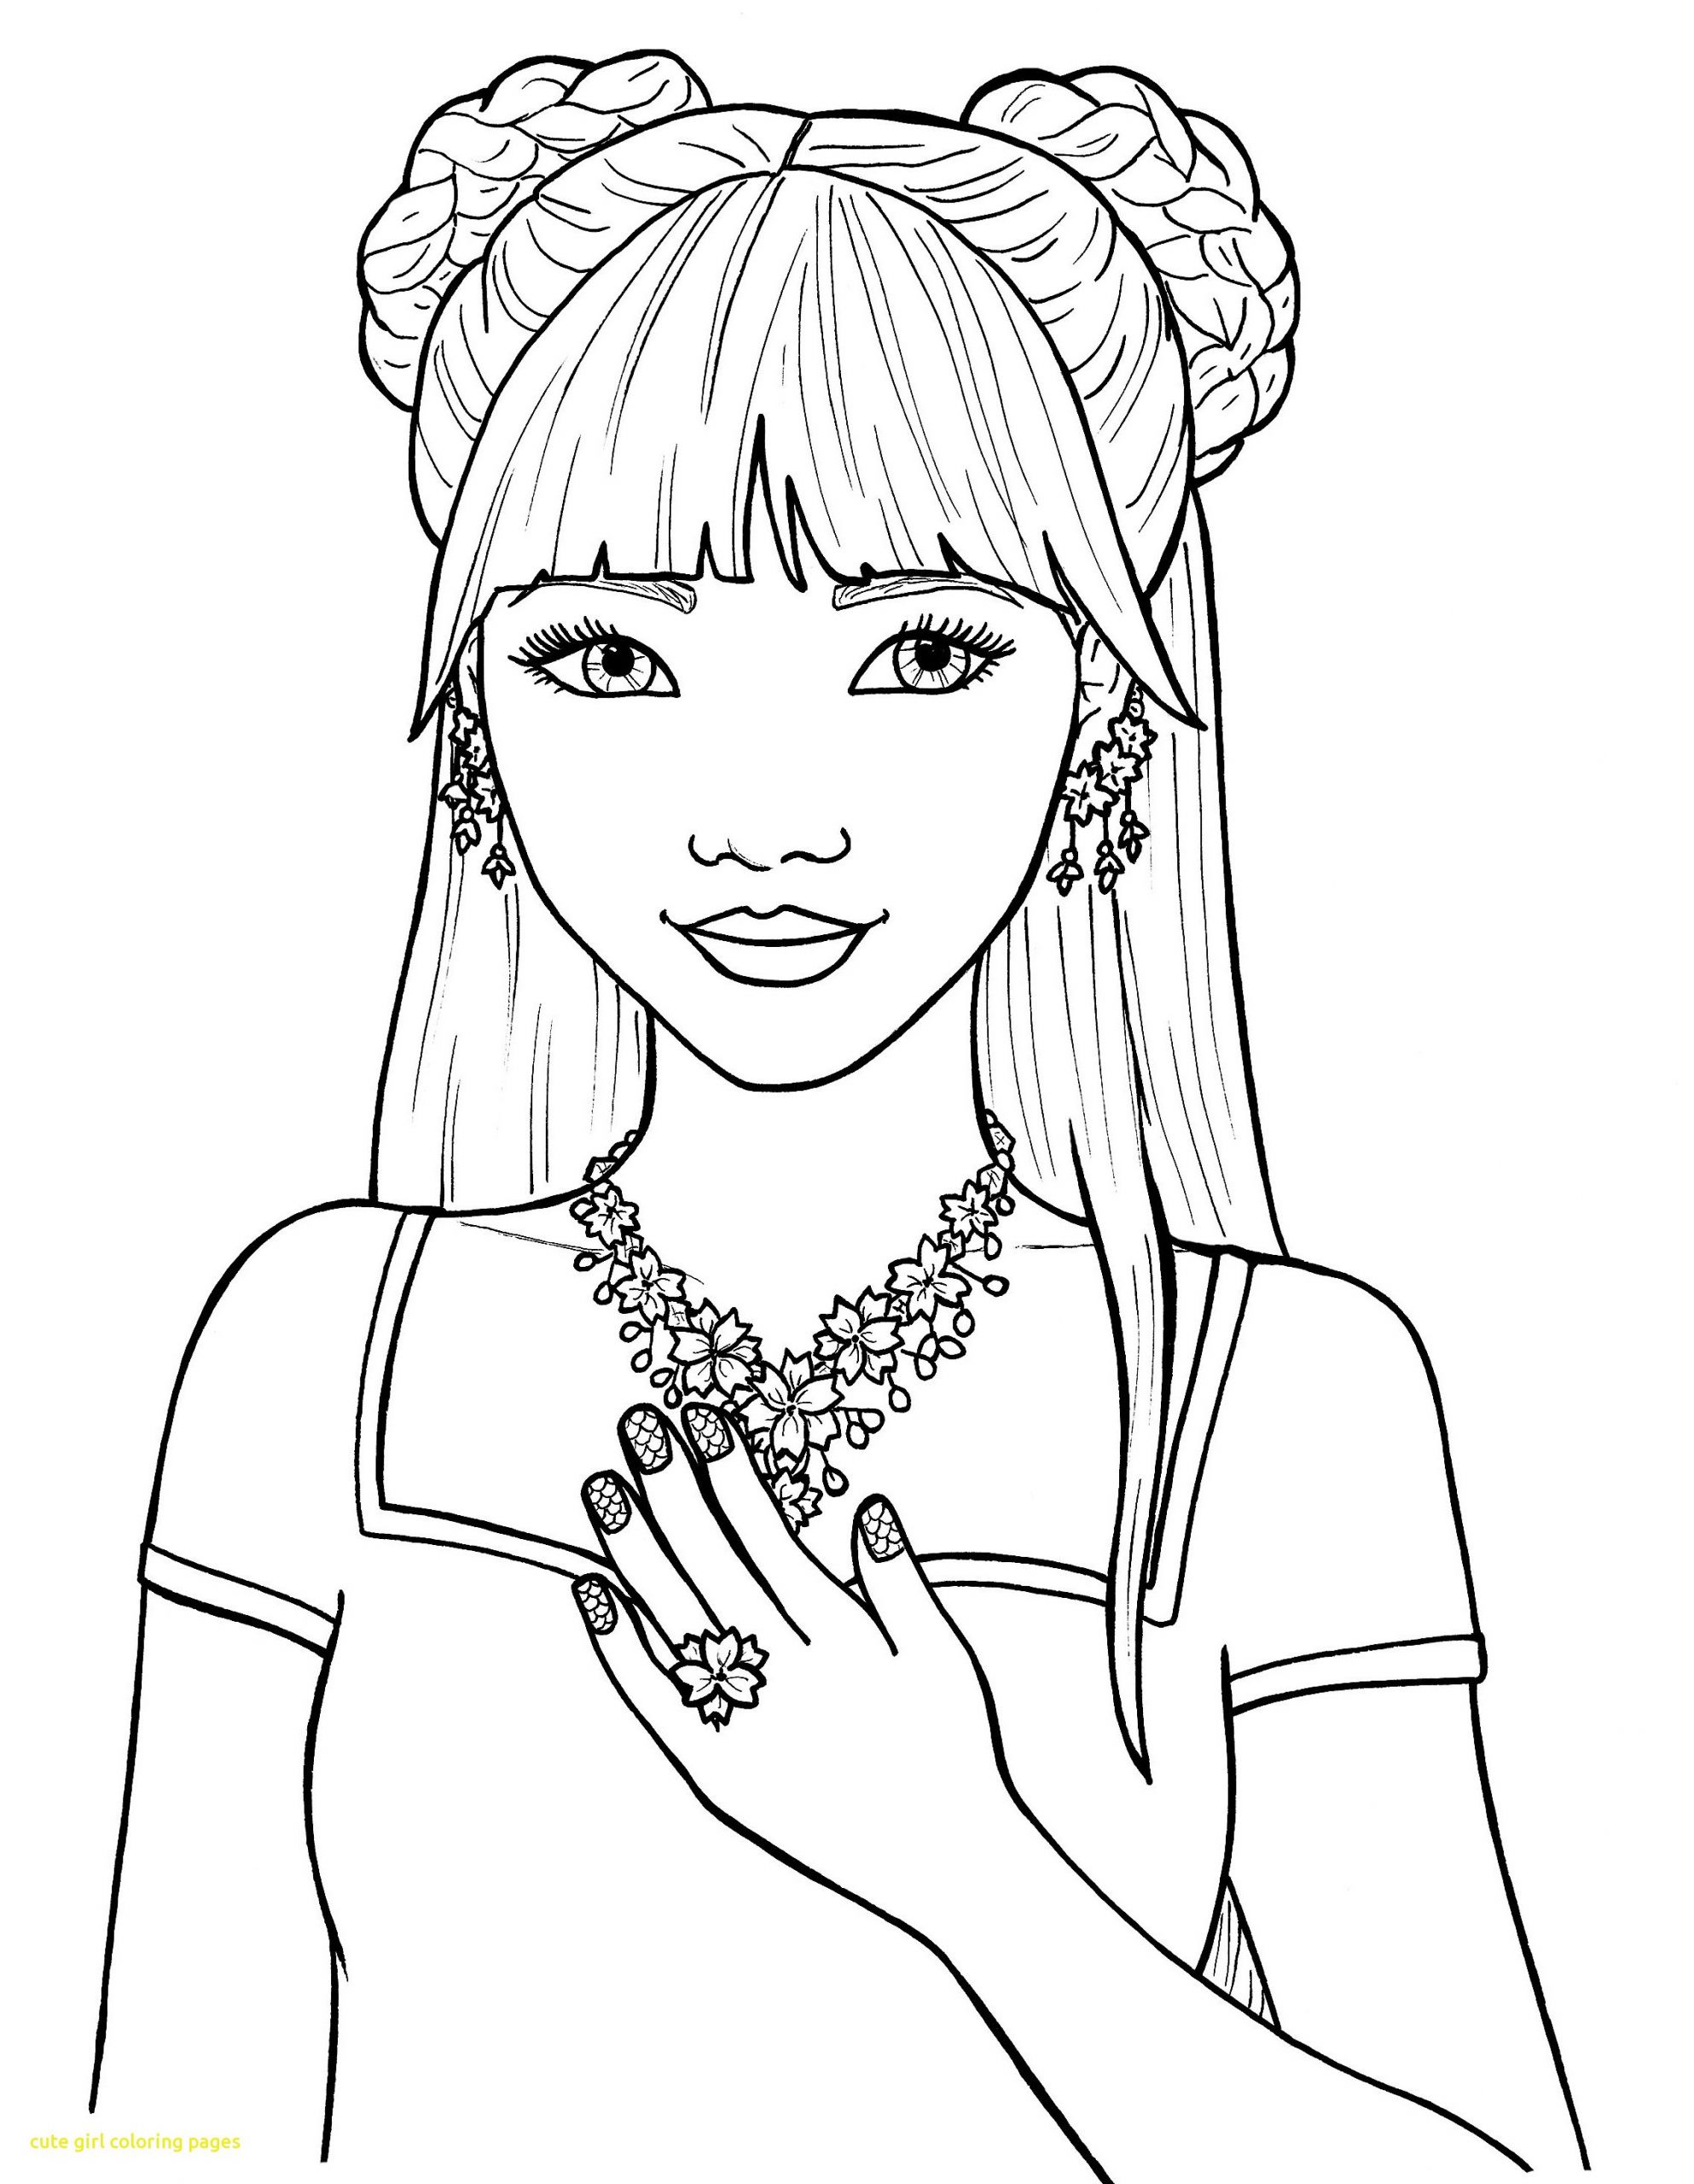 Girls Coloring Sheets
 Coloring Pages for Girls Best Coloring Pages For Kids